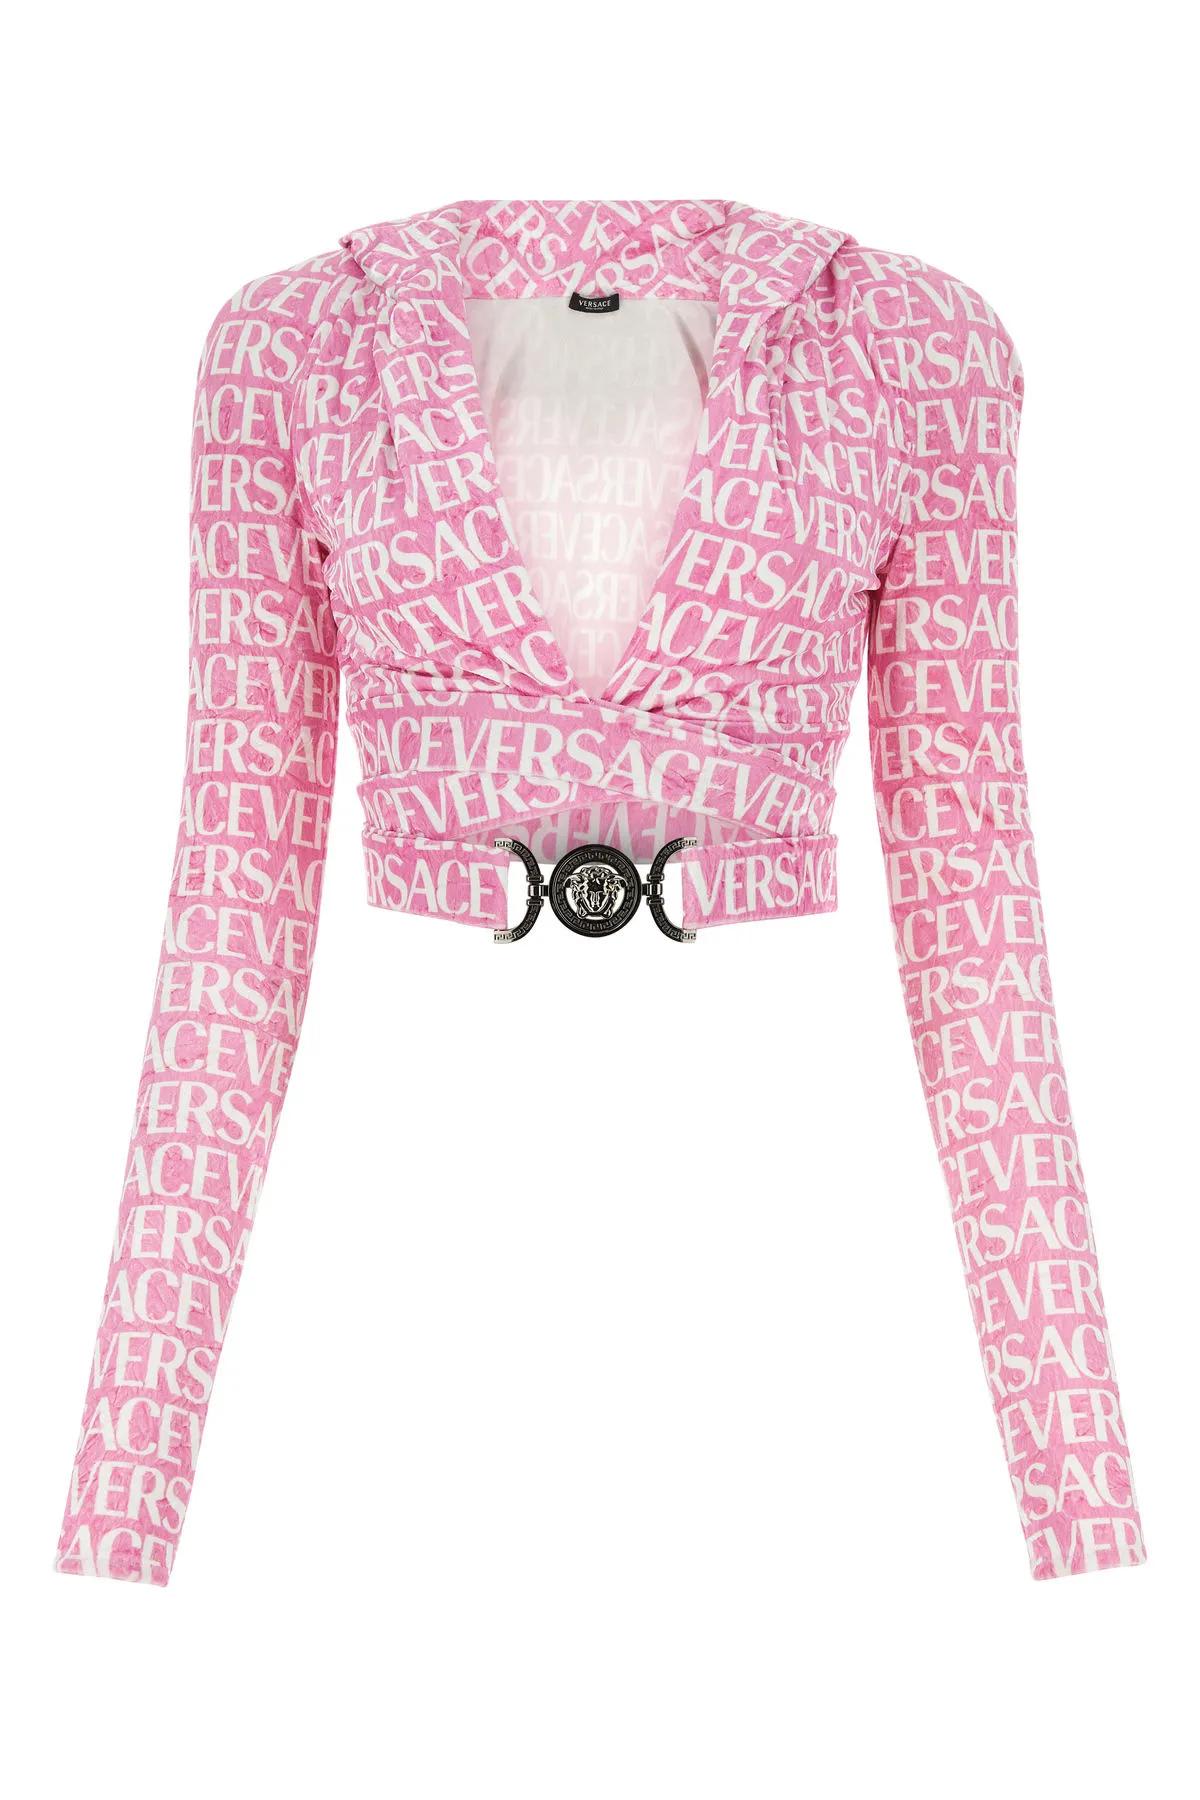 Shop Versace Printed Chenille Top